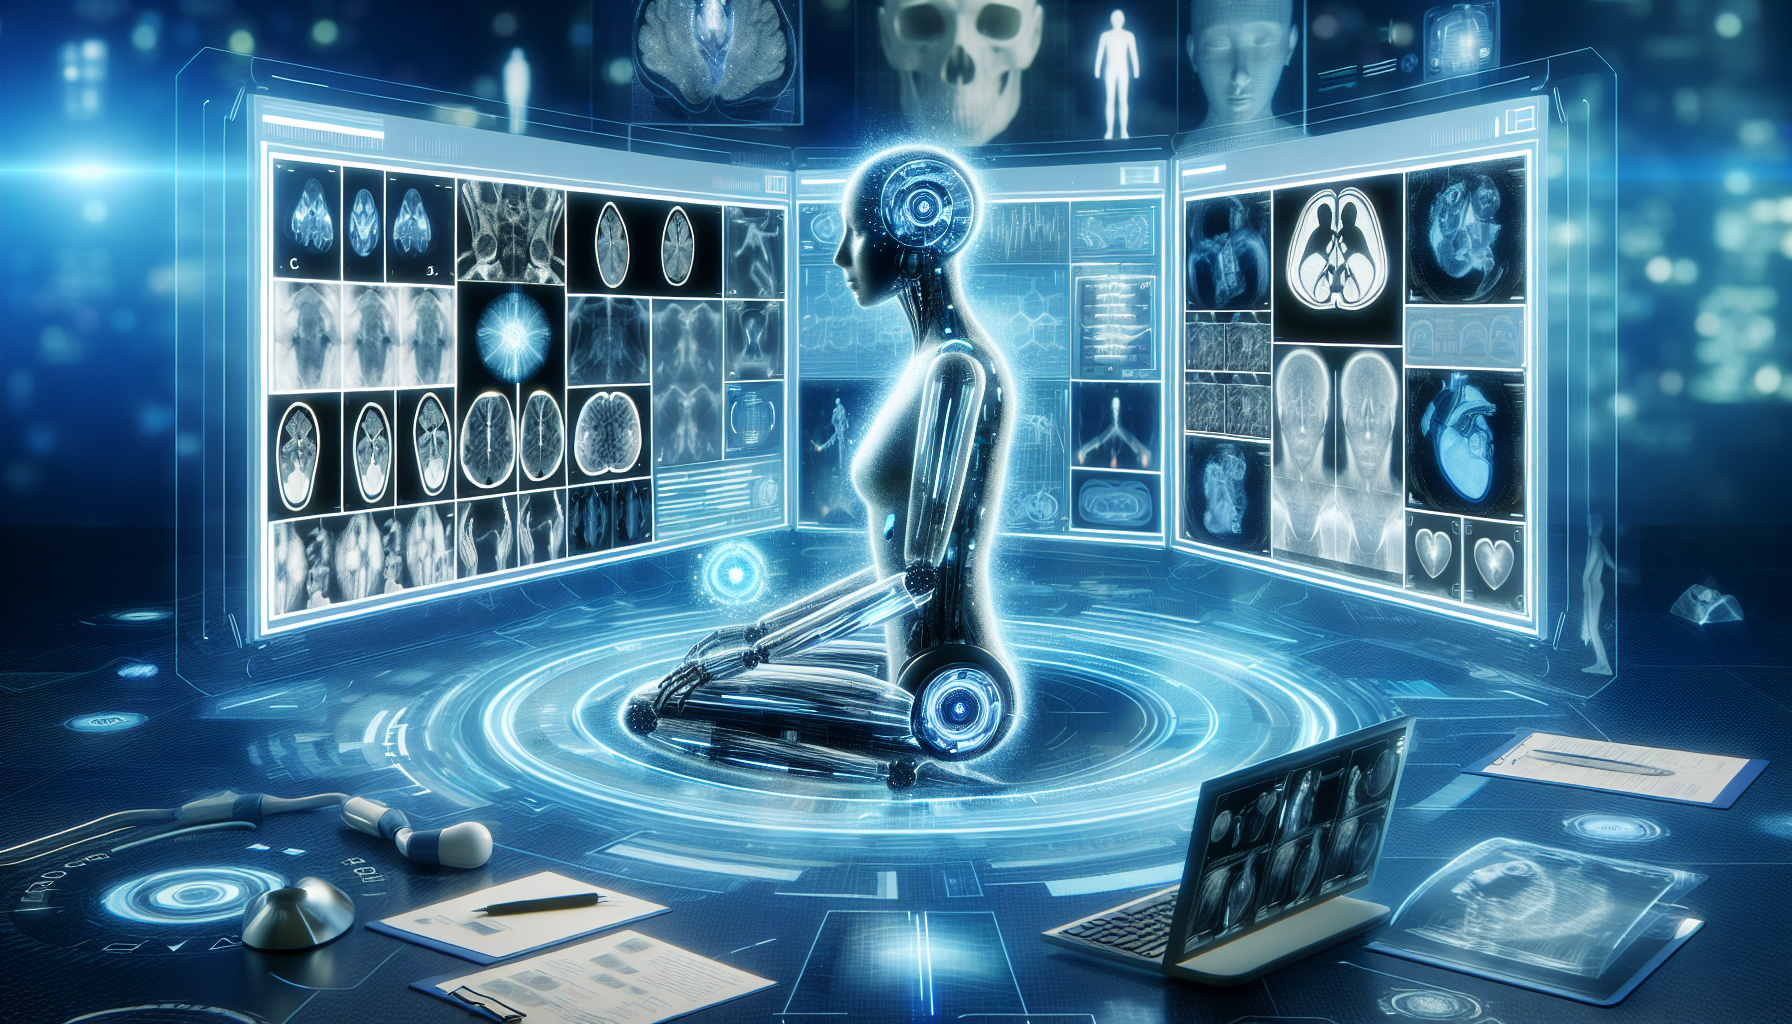 An artistic representation of AI analyzing medical images for improved diagnosis